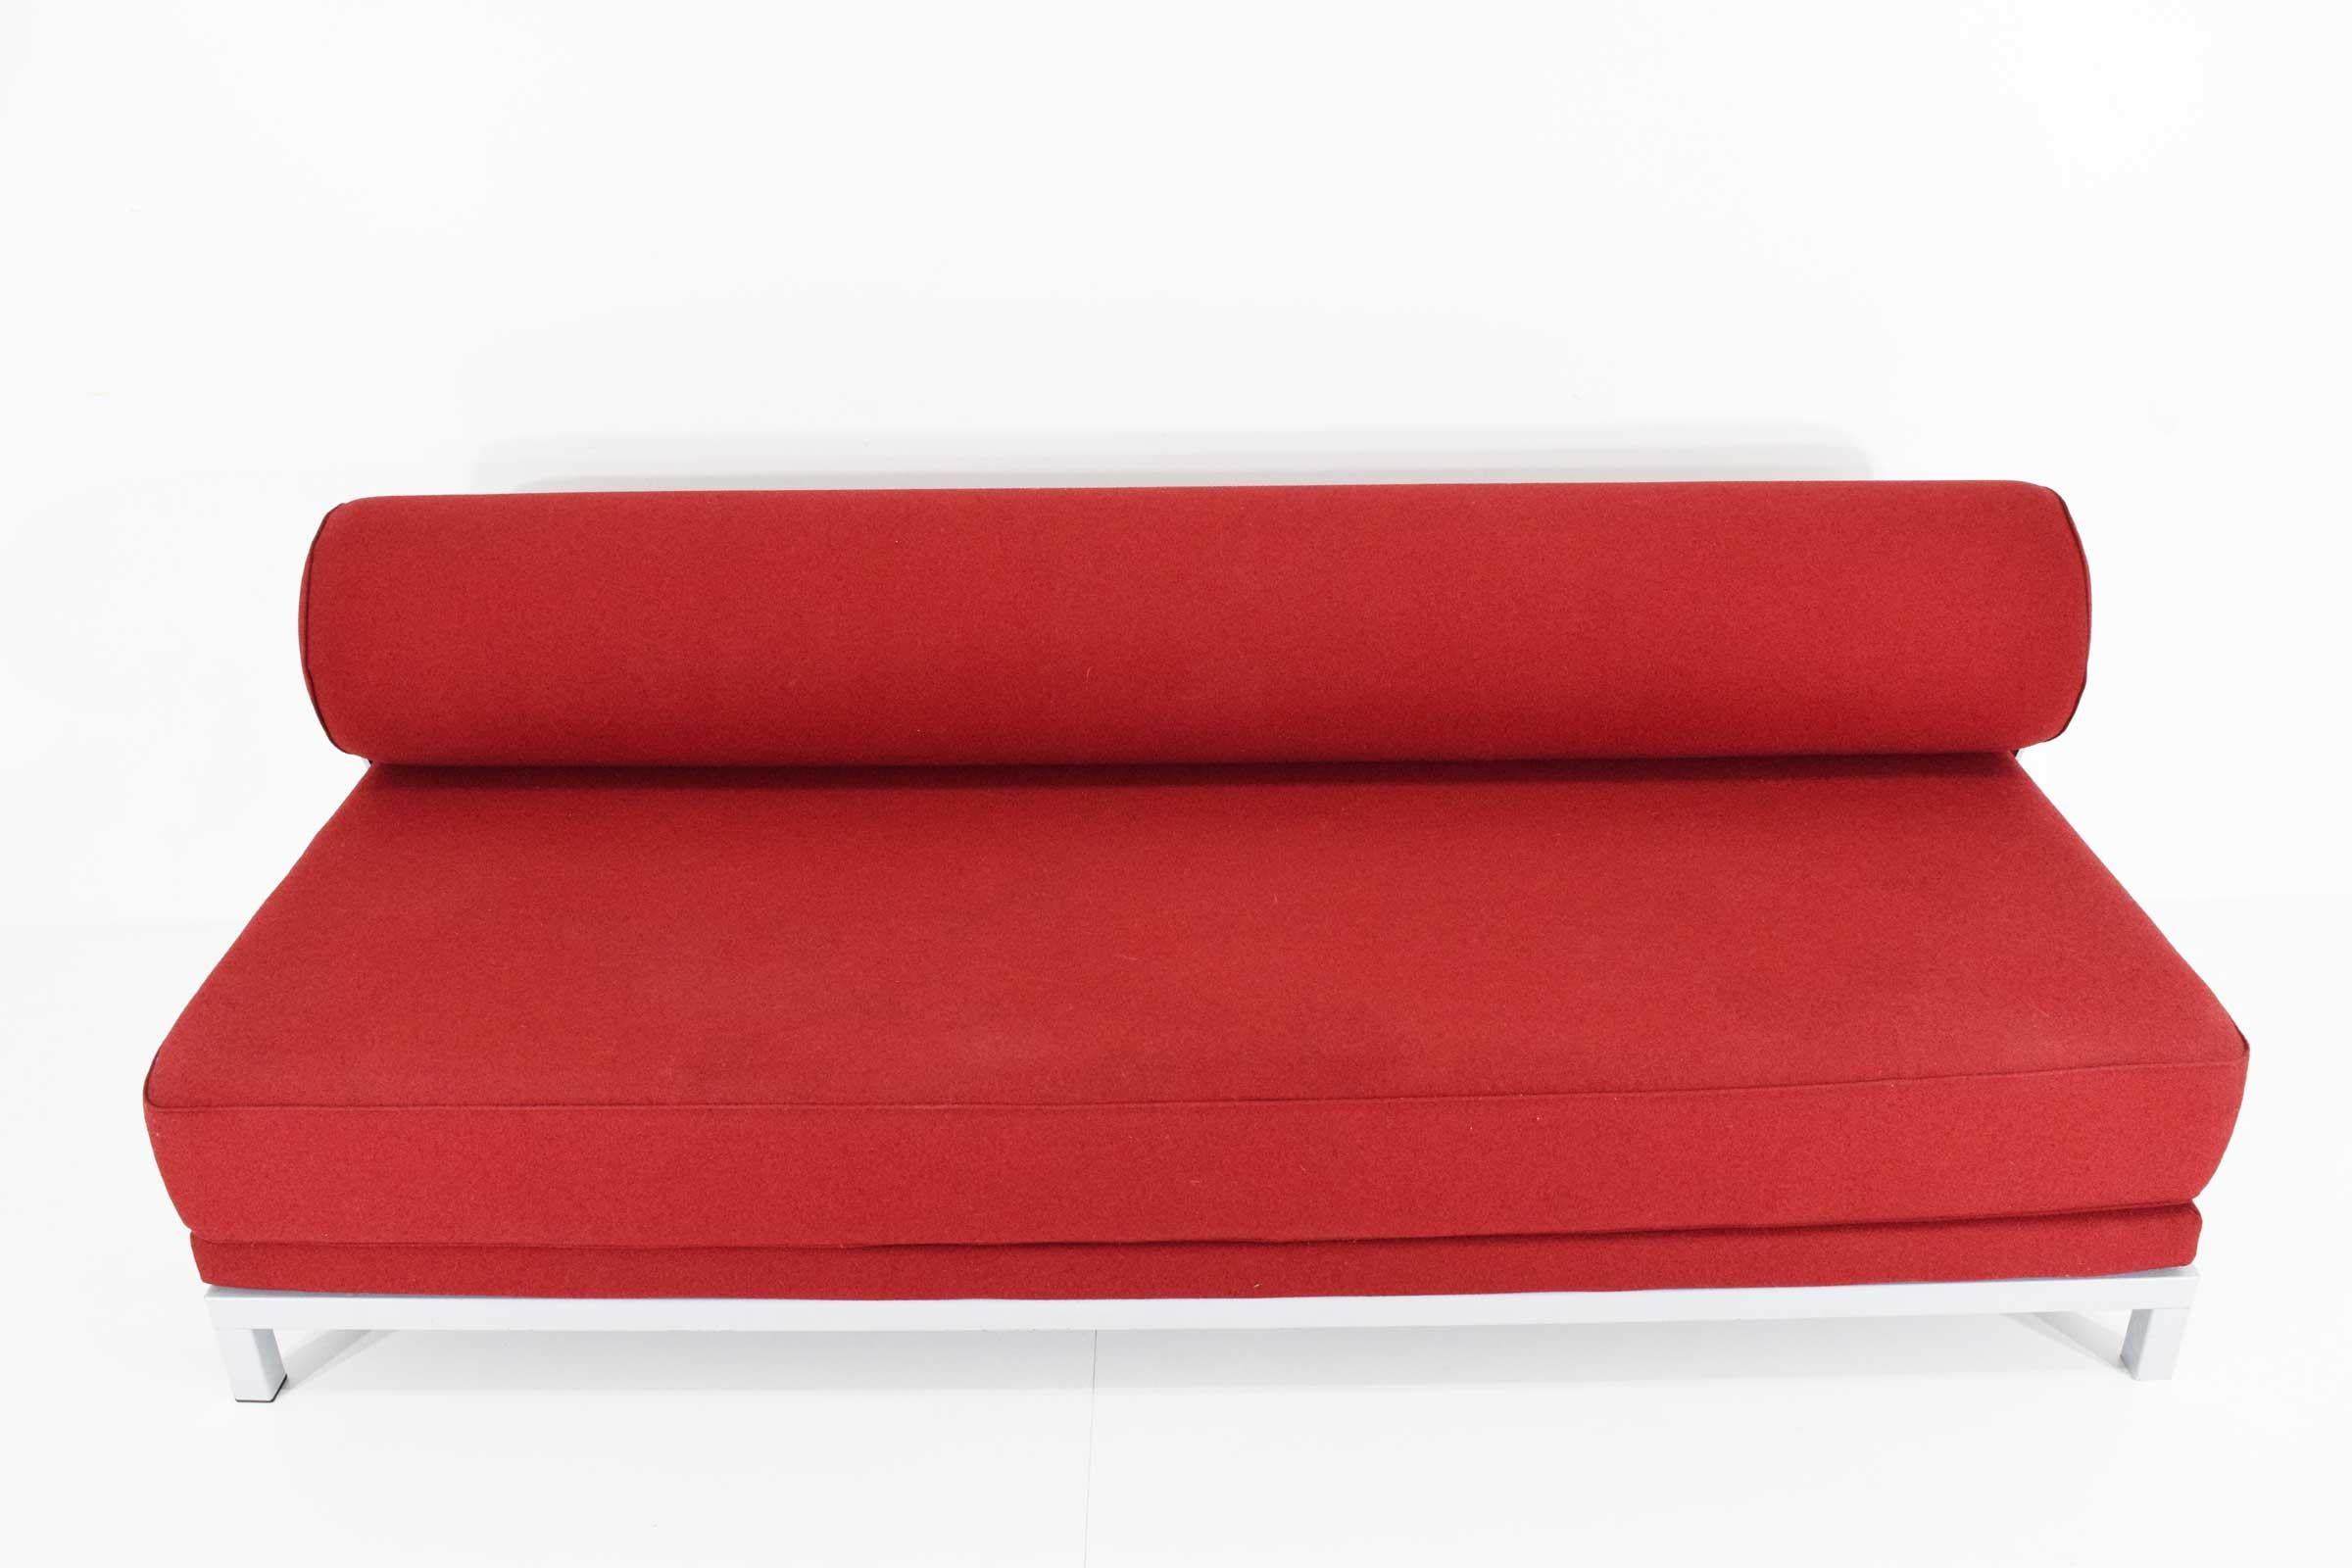 Winner of a furniture competition at the Århus School of Architecture in Denmark in 1999, Flemming Busk’s Twilight sleeper sofa distills the concept of a convertible couch to a simple cylinder and rectangle. A compact and nicely scaled sofa,